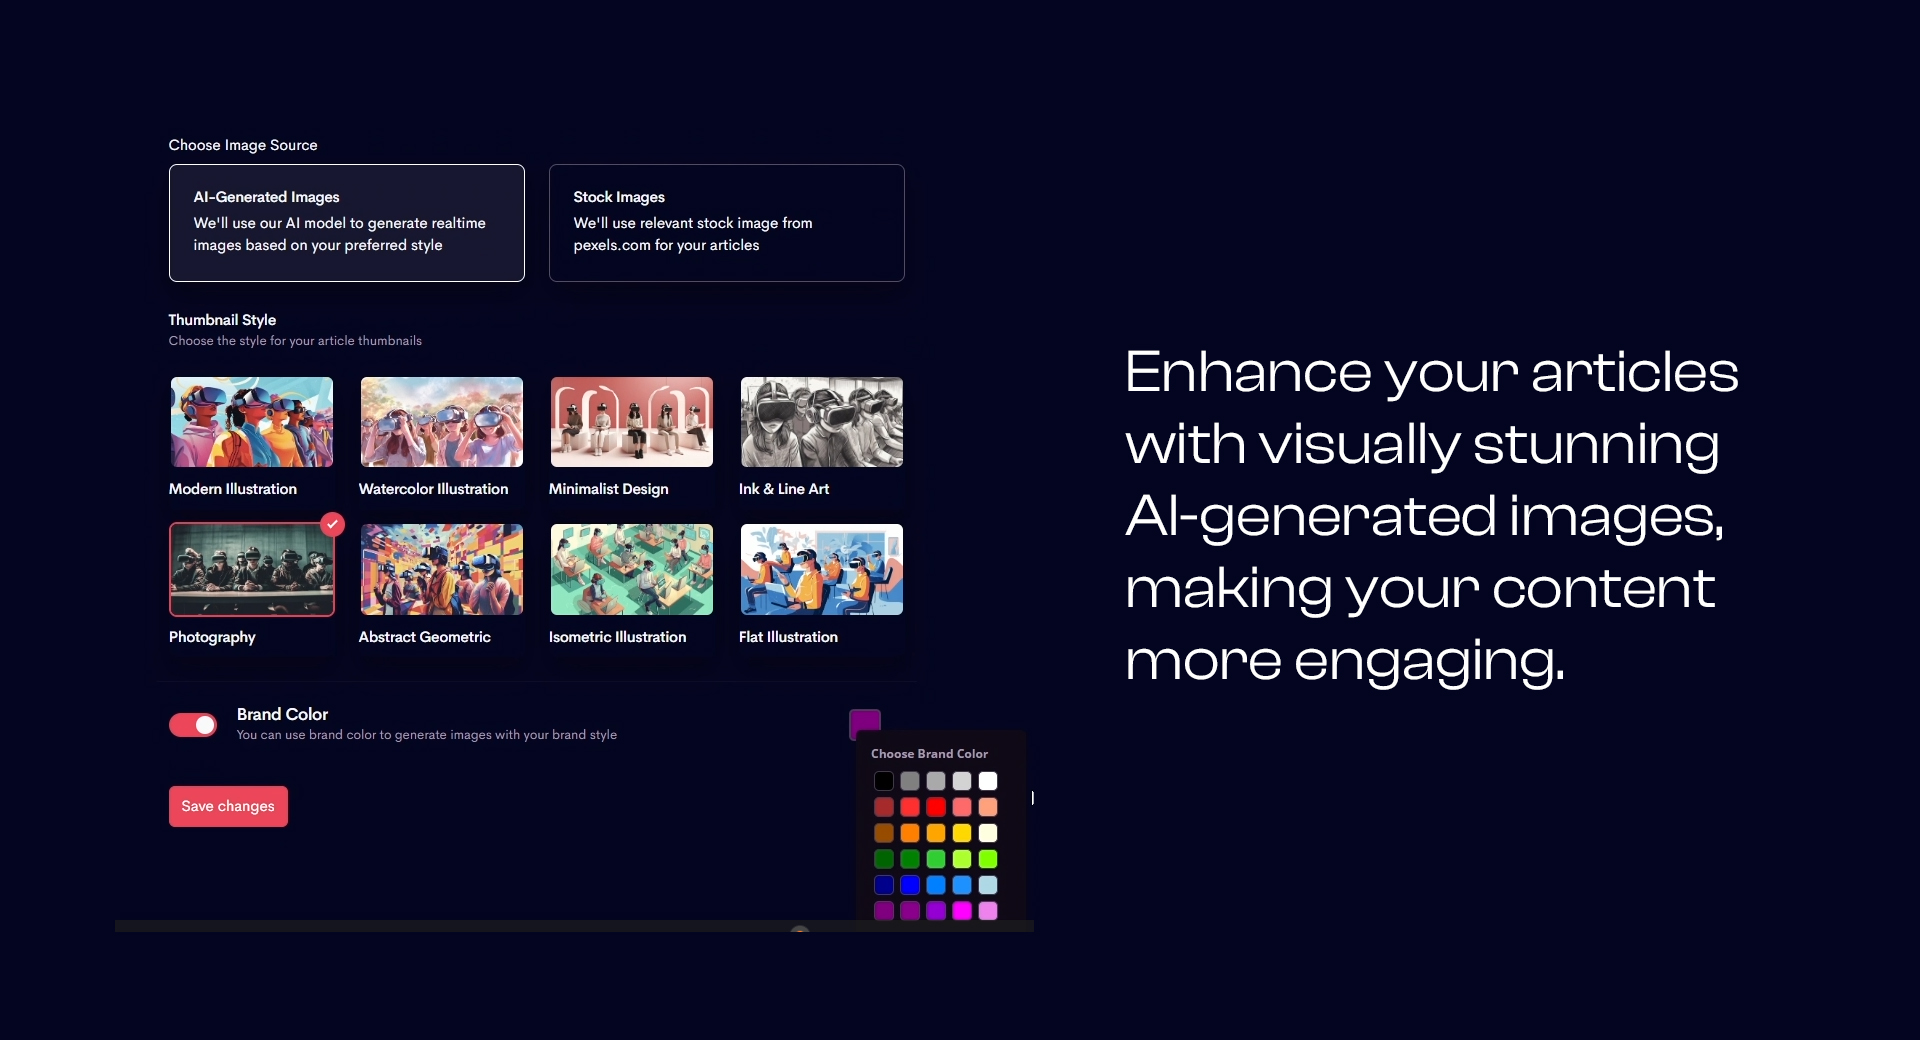 Enhance your articles with visually stunning AI-generated images, making your content more engaging.